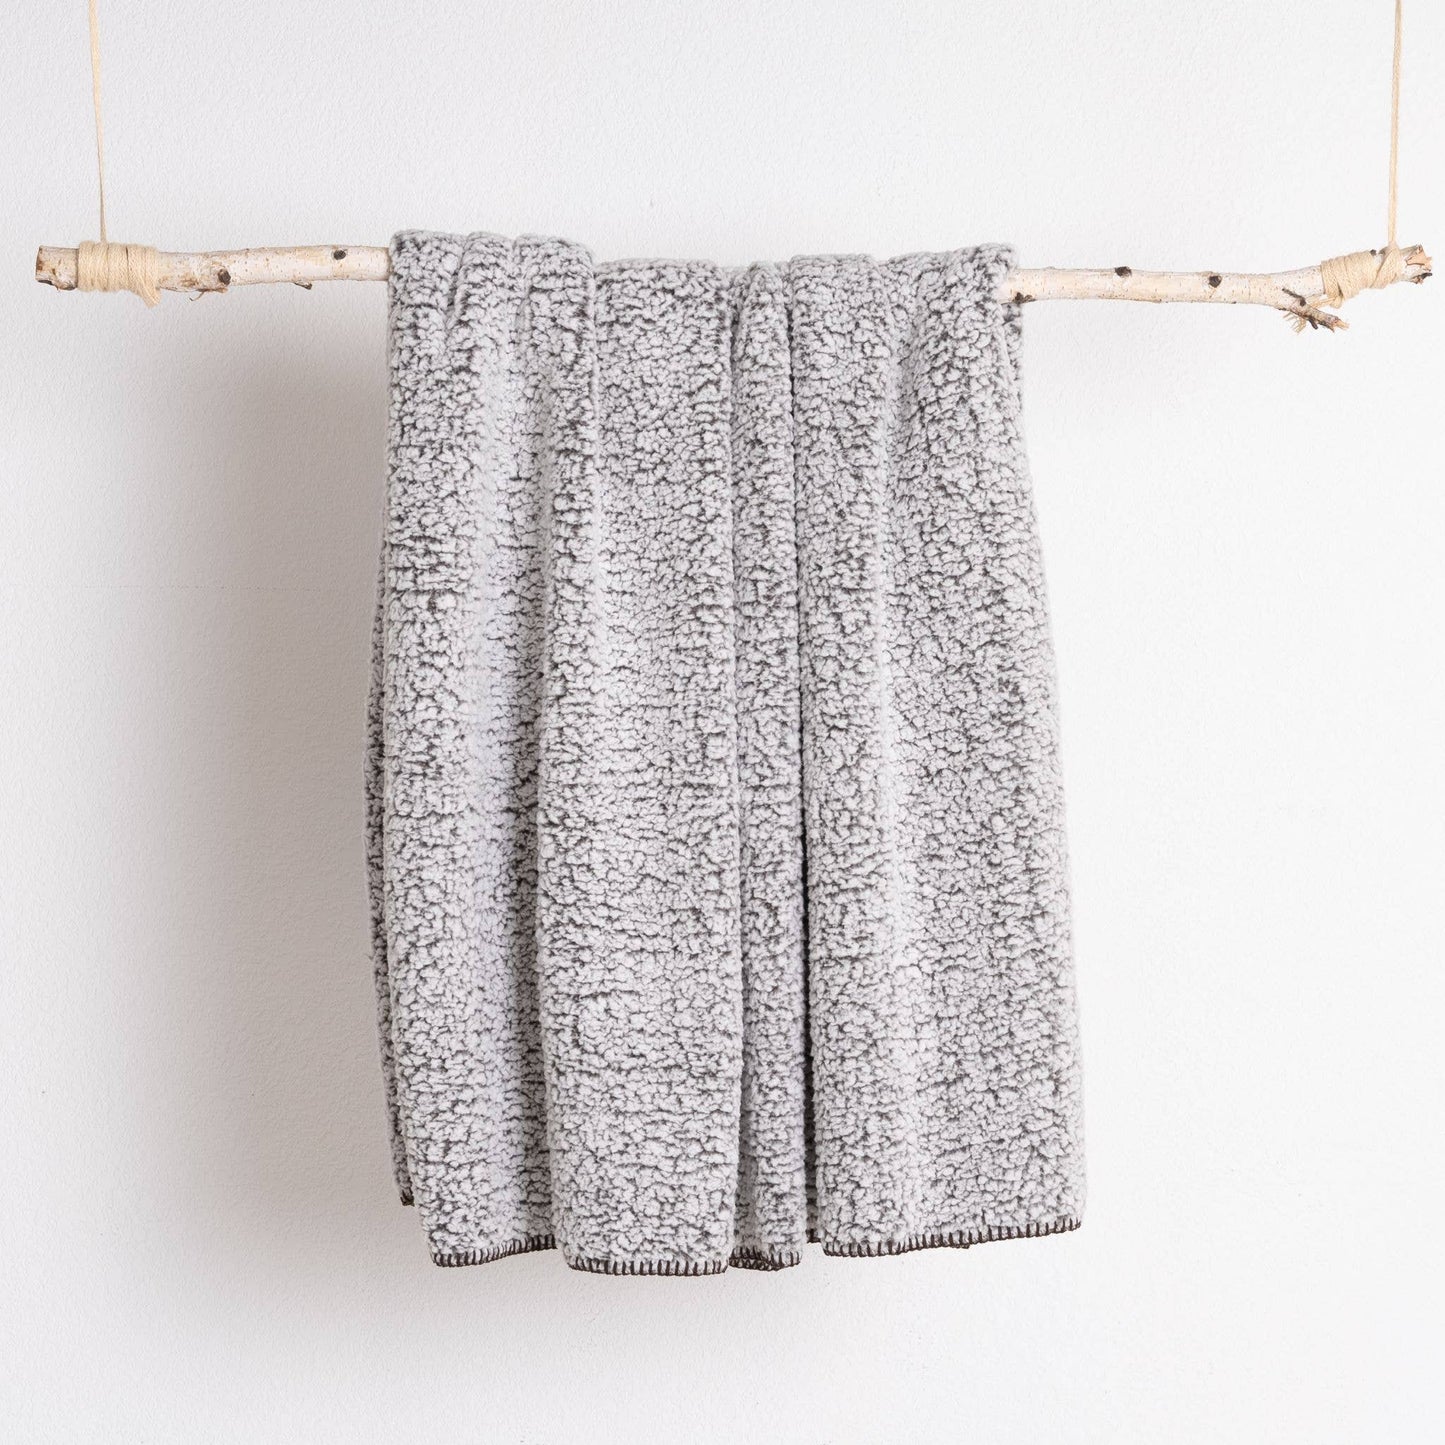 Heathered Cozy Sherpa Throw 50in x 60in - Boxed Bliss Creations